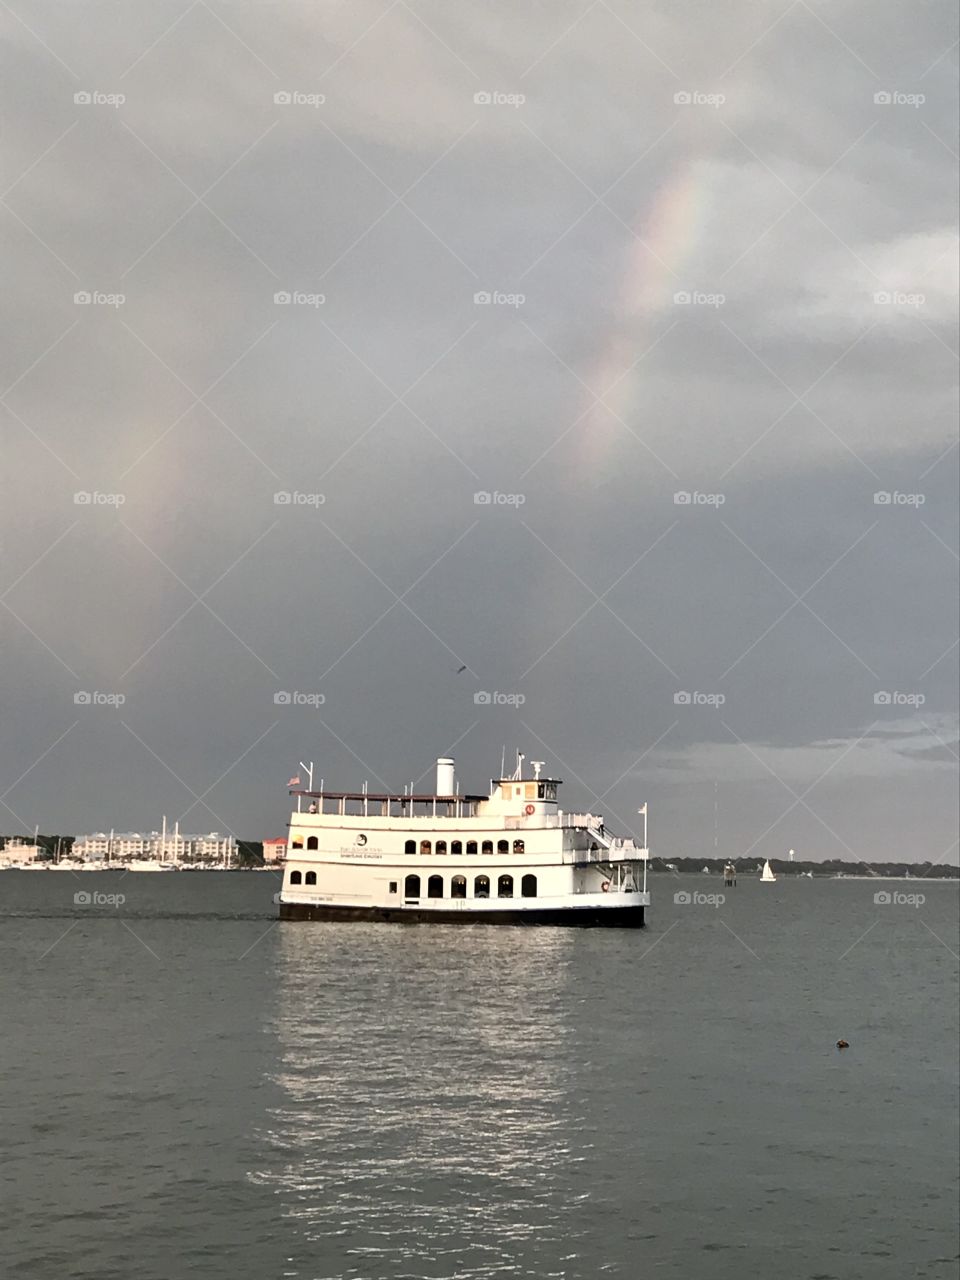 Dinner cruise in the harbor at sunset with rainbow over the water